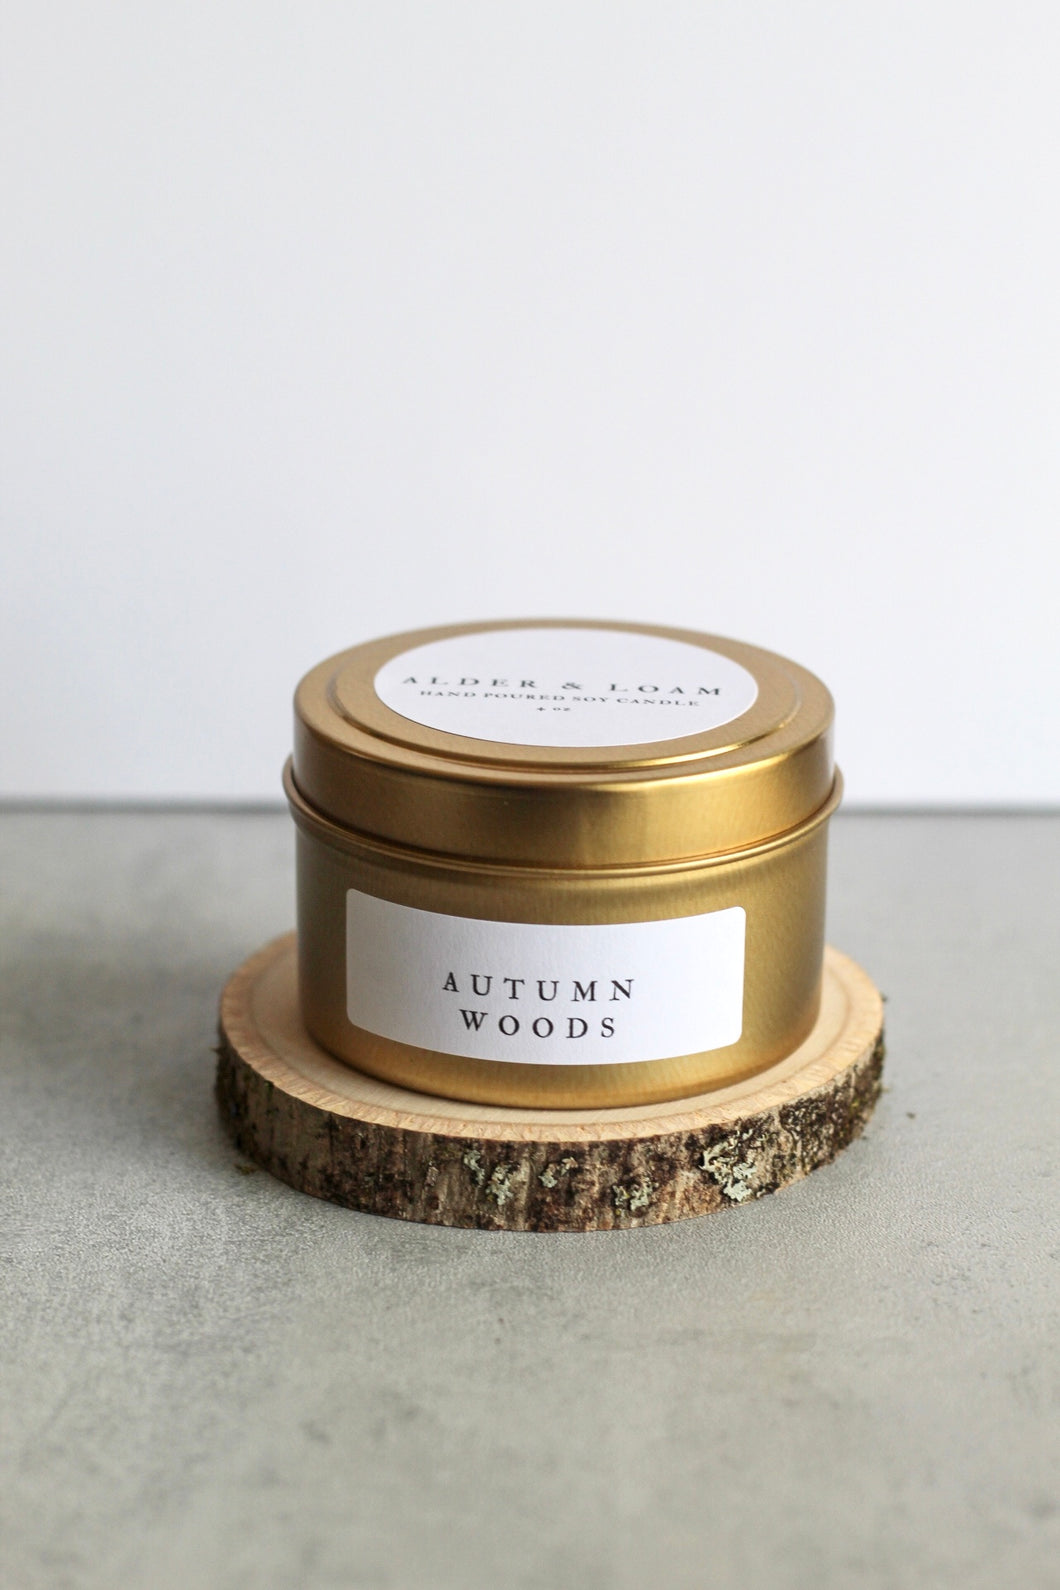 Autumn Woods Soy Candle, Hand Poured, Natural, Eco Friendly, Earthy Scent, Fall Candle, 4 oz Tin